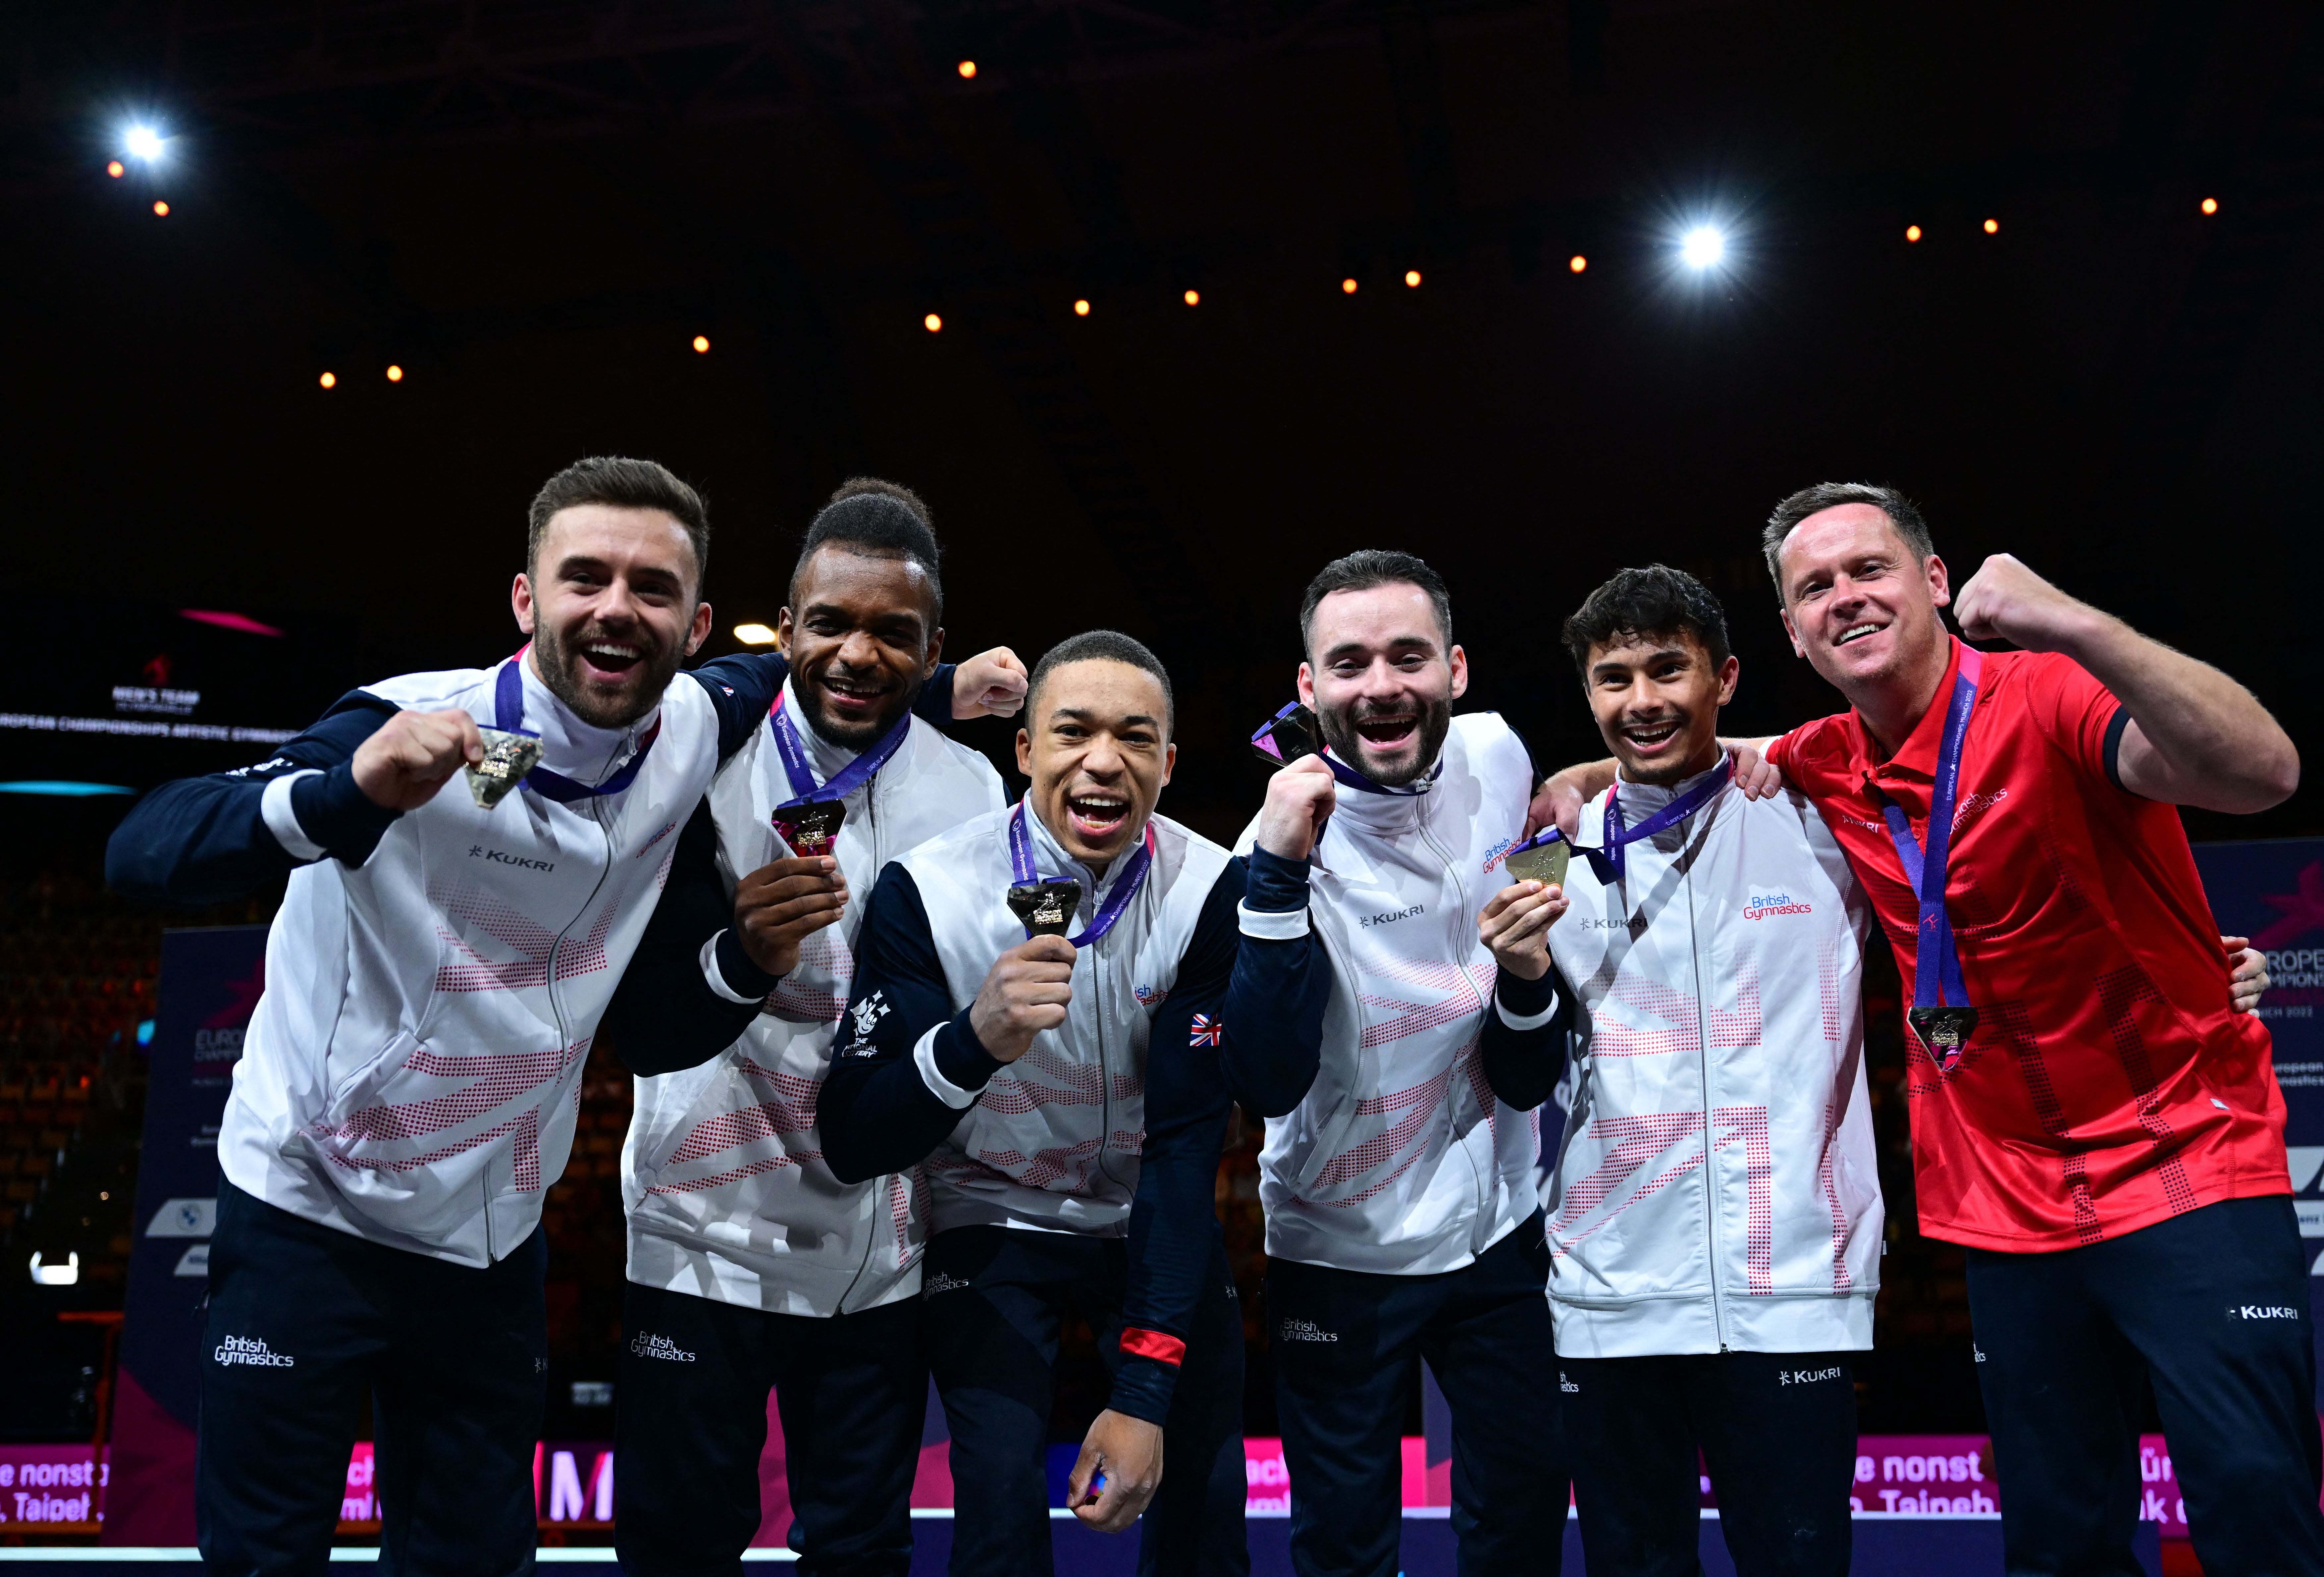 GB won the men’s team title at the European Championships over the summer